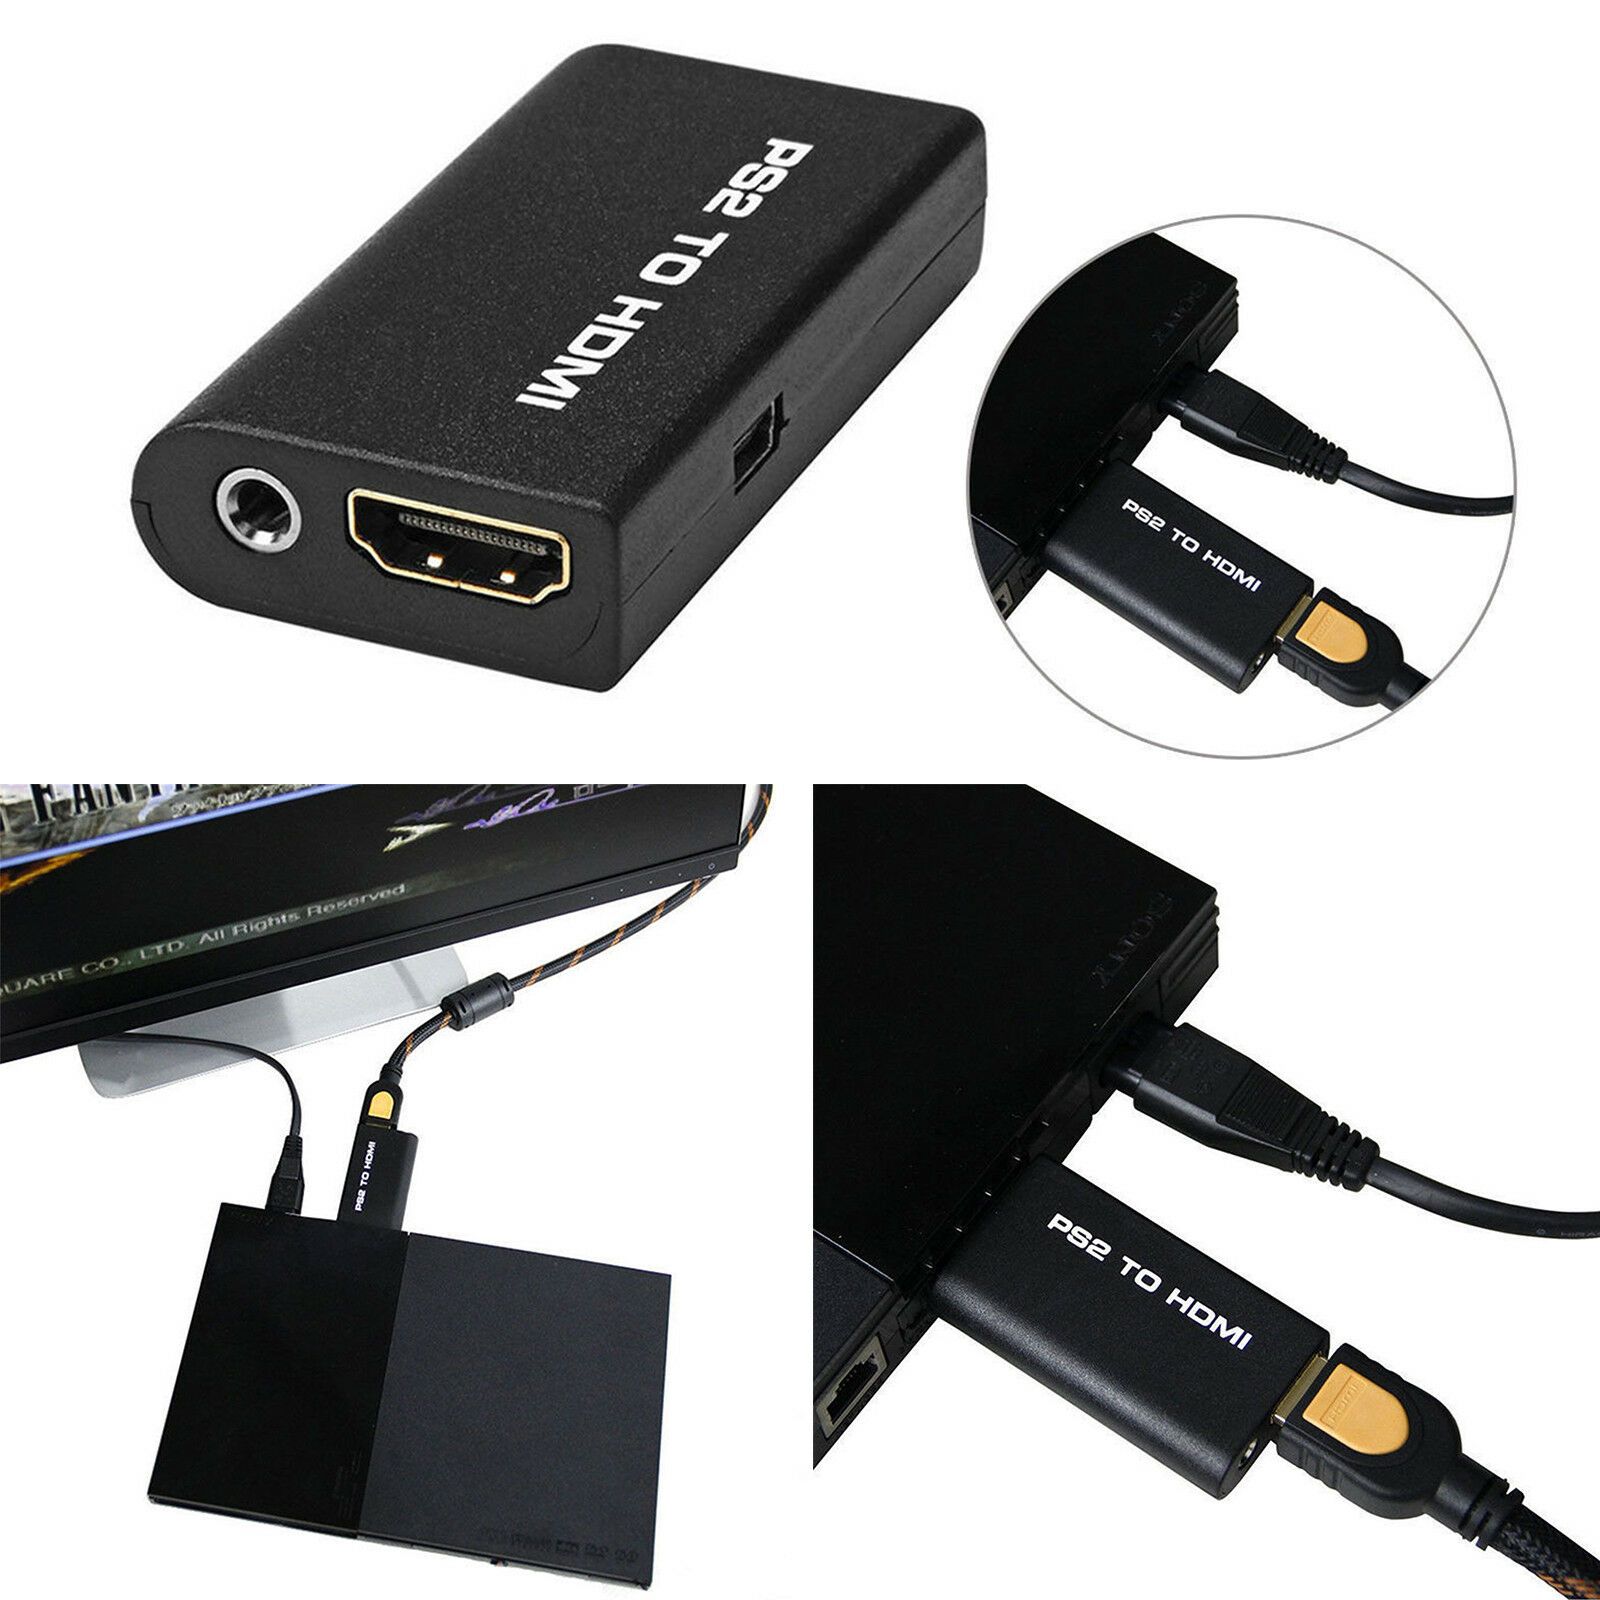 PS2-to-HDMI-Audio-Video-Cable-AV-Adapter-Converter-w35mm-Audio-Output-for-HDTV-1743712